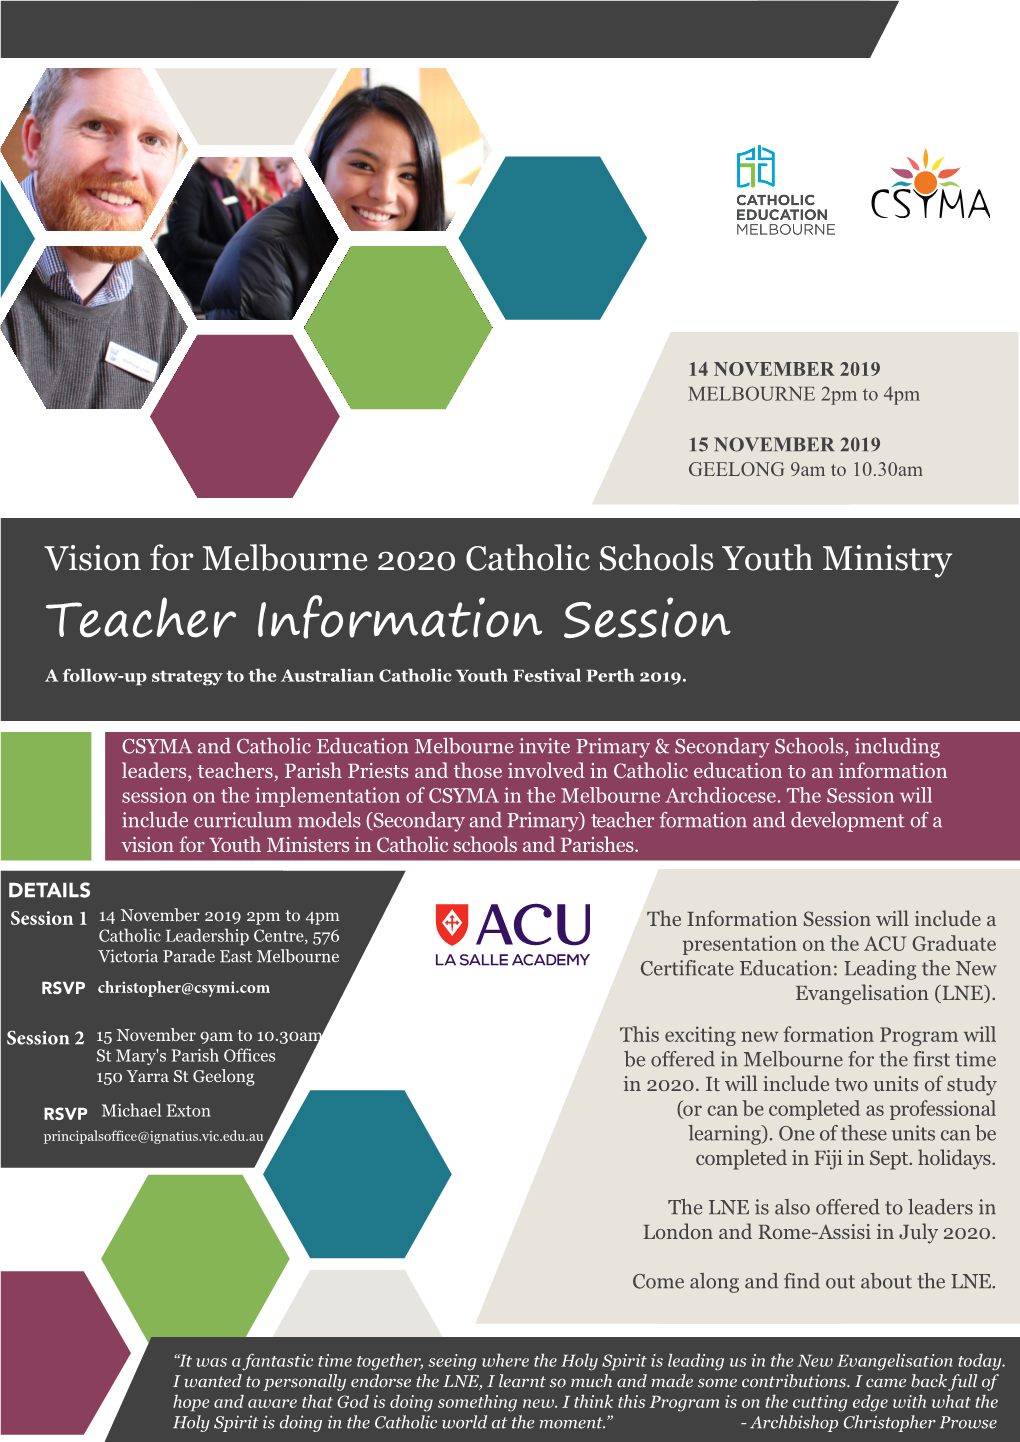 Teacher Information Session a Follow-Up Strategy to the Australian Catholic Youth Festival Perth 2019